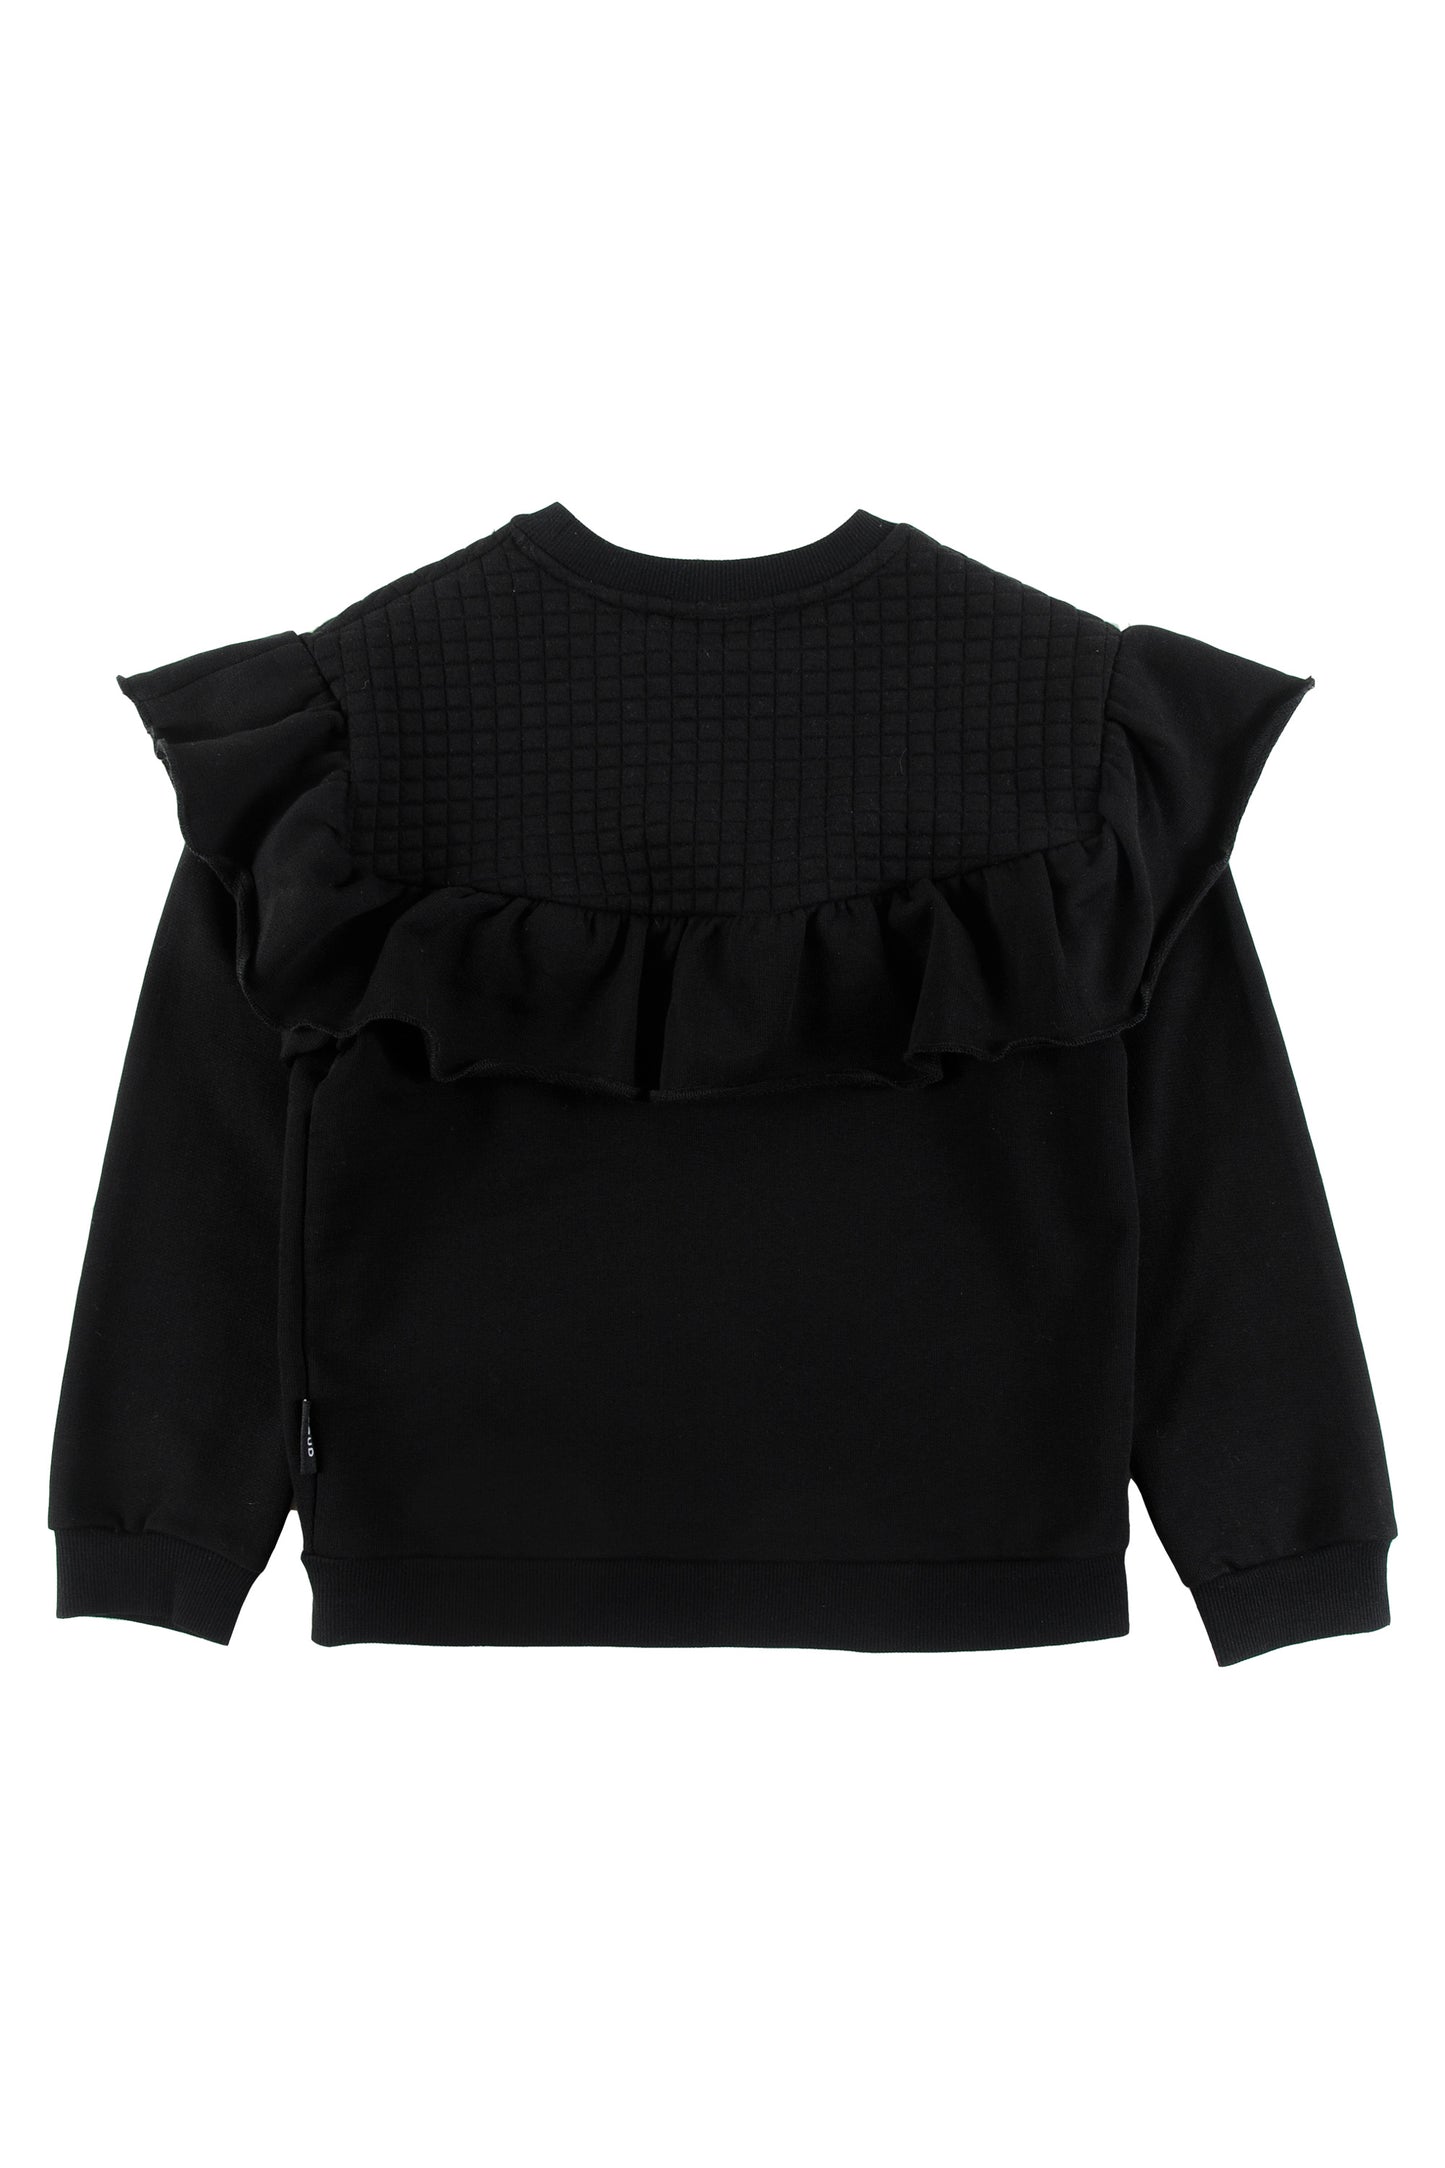 LOUD BLACK QUILTED RUFFLE TRIM TOP [Final Sale]